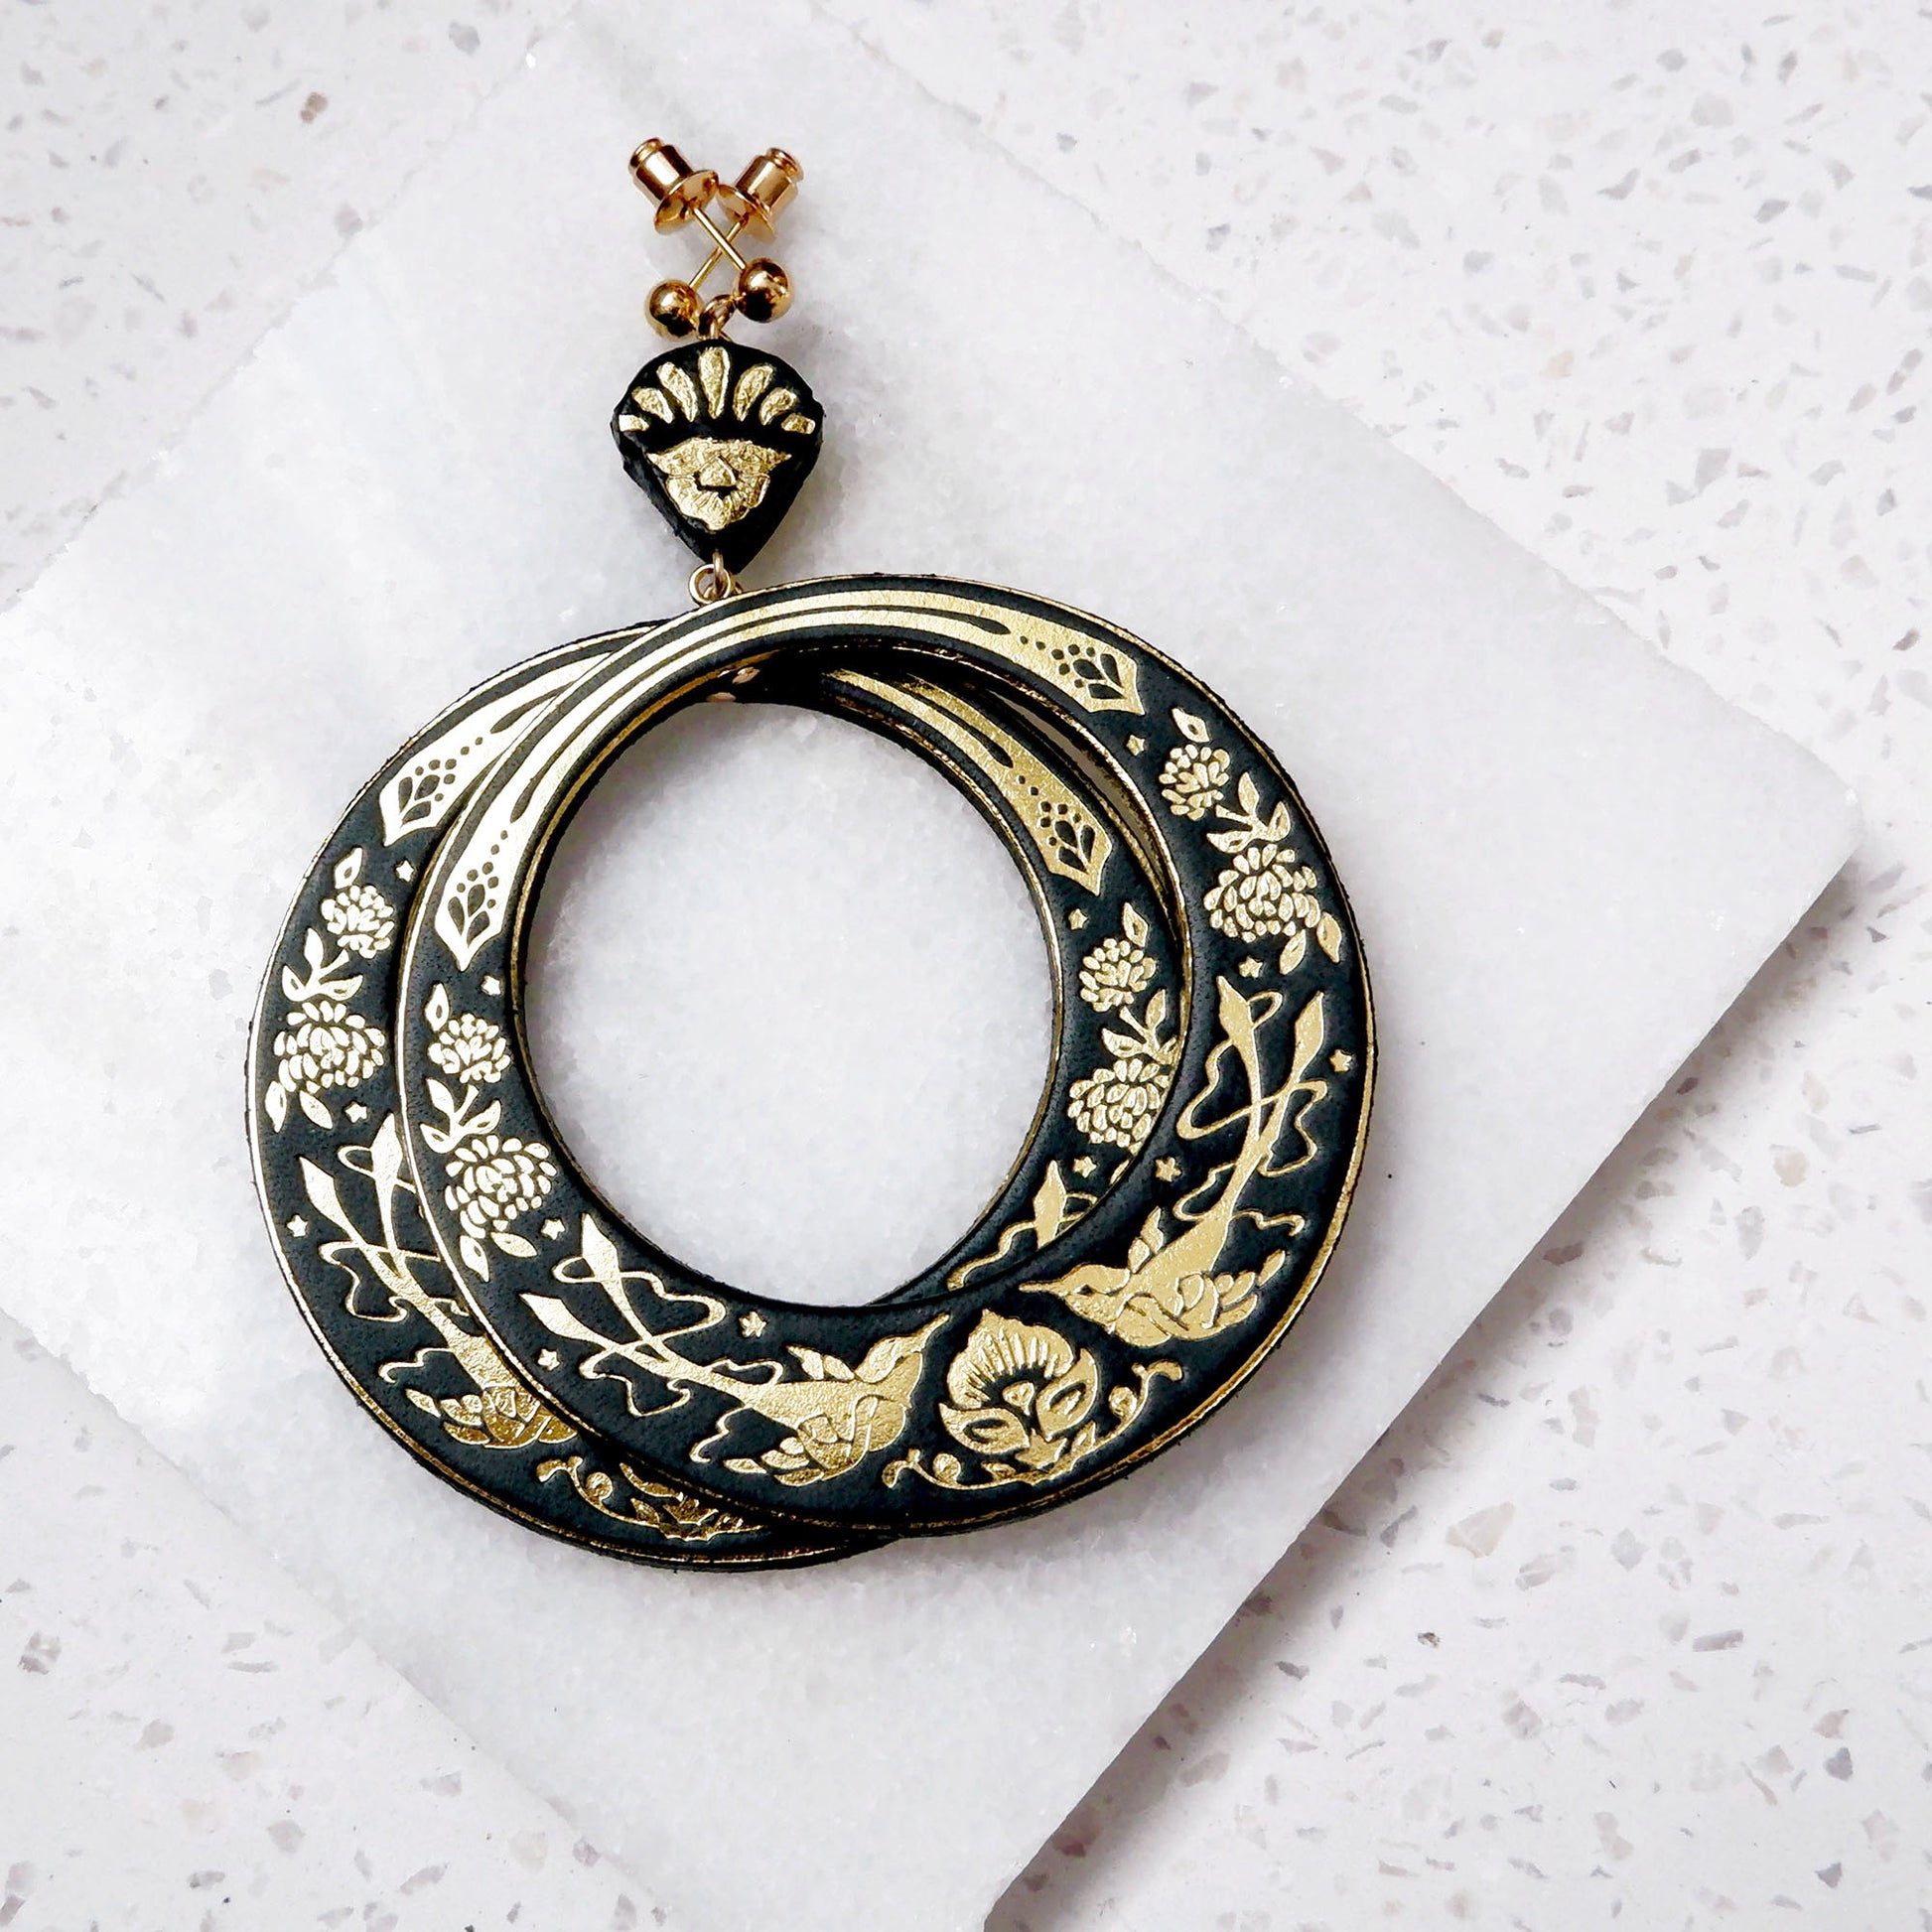 large hoops earring printed with birds & flowers in gold on  black leather